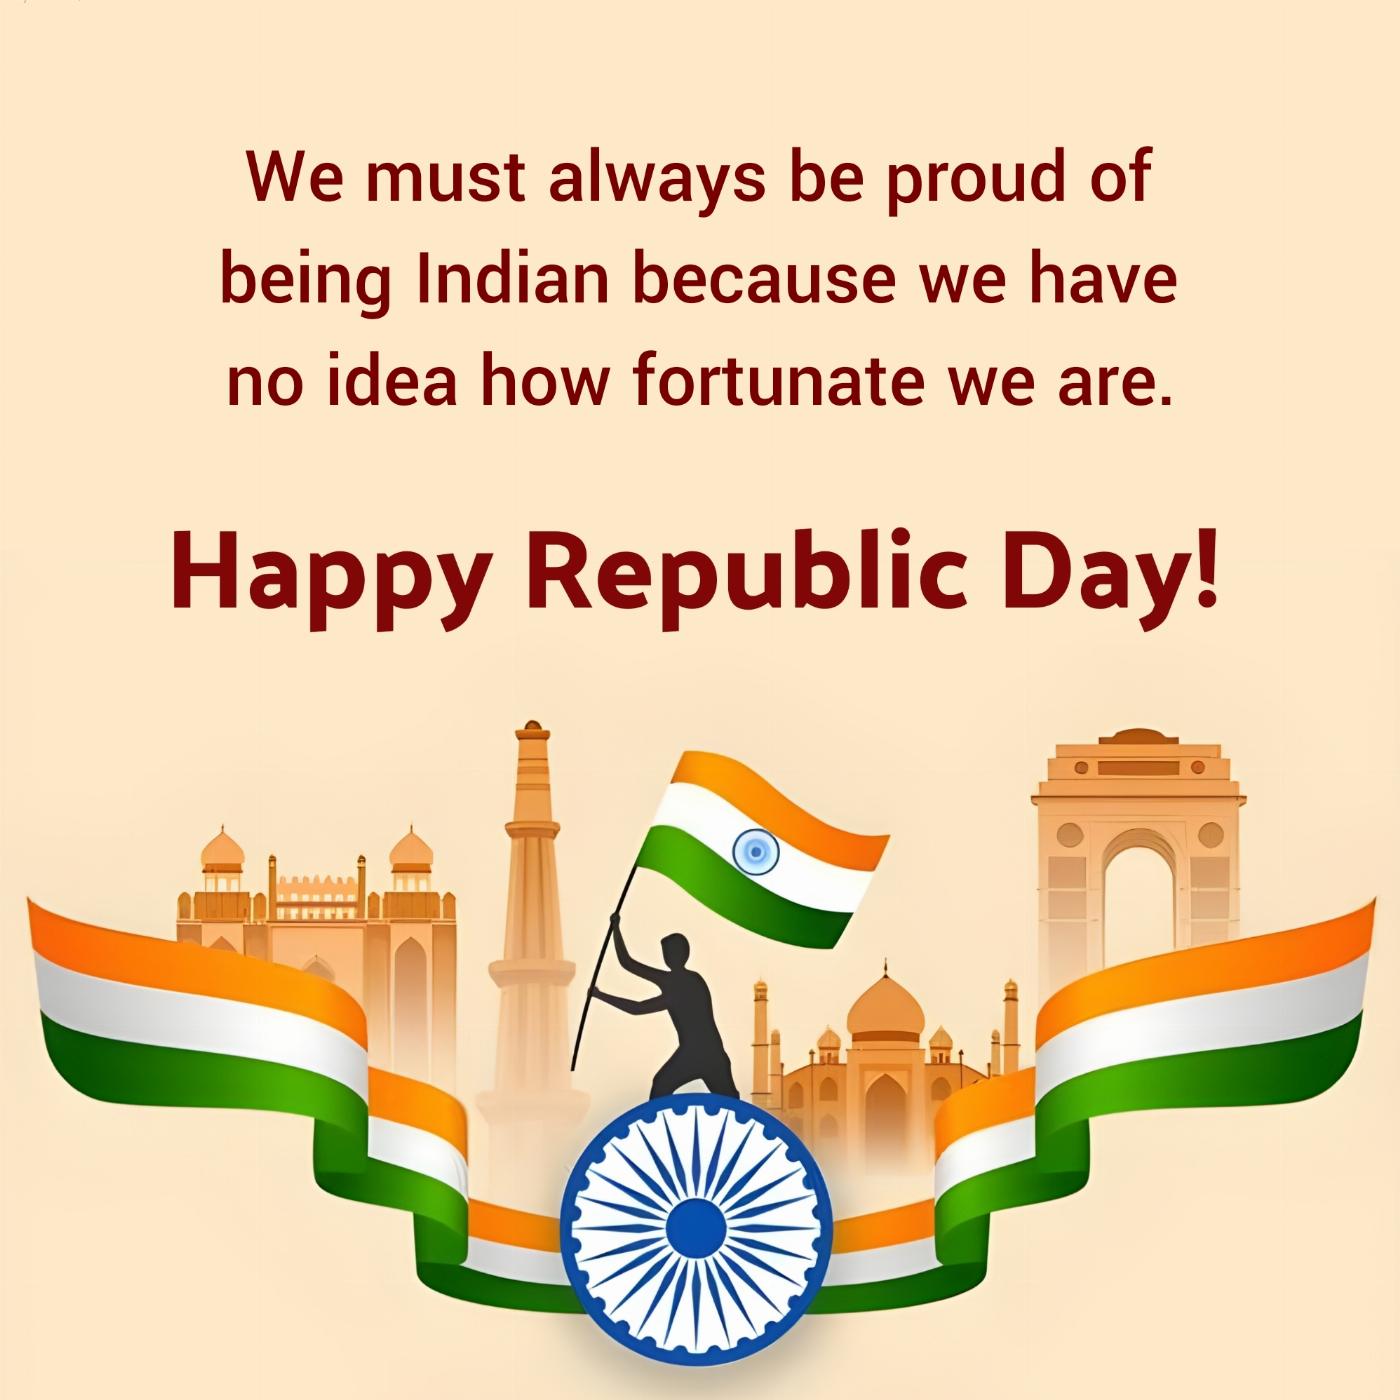 We must always be proud of being Indian